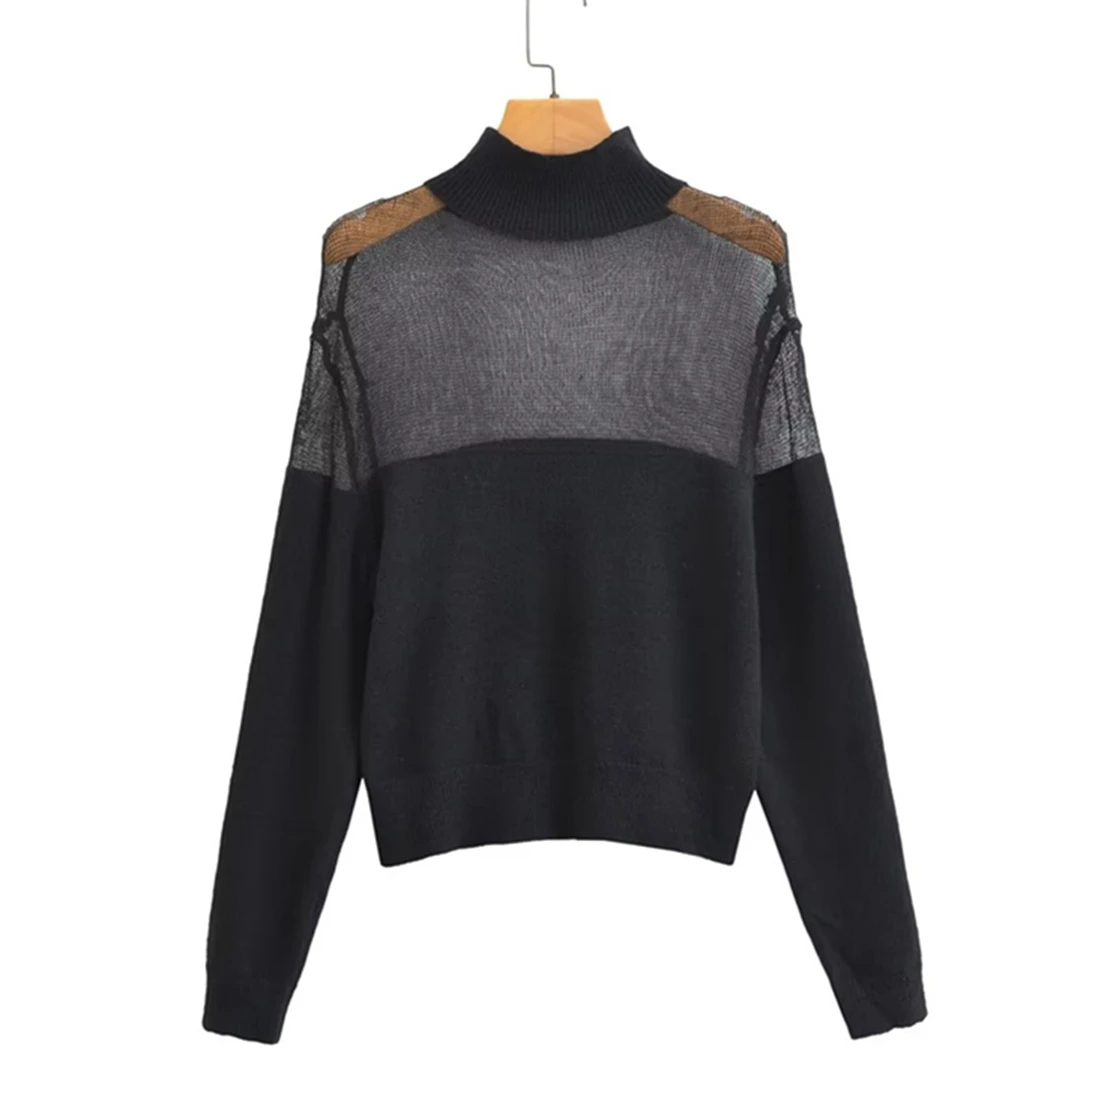 

Jenny&Dave England Style Fashion Splicing Perspective Stand Neck Black Knitwear Casual Sweaters Women